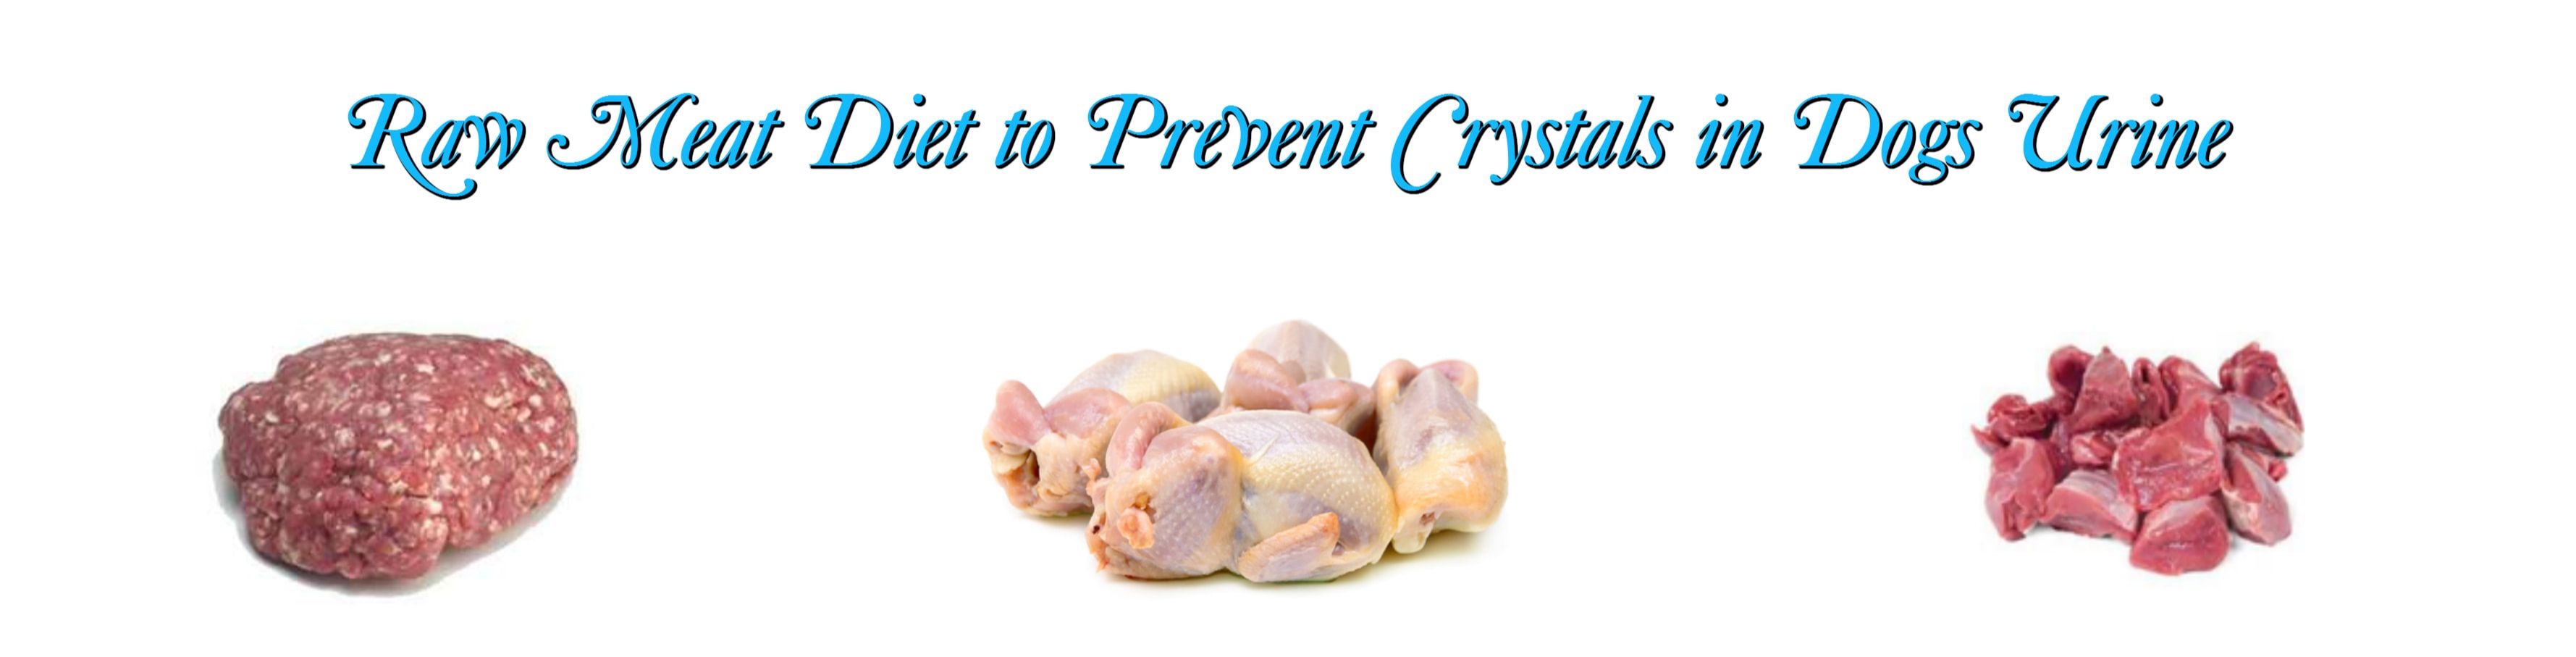 struvite crystals in dogs foods to avoid